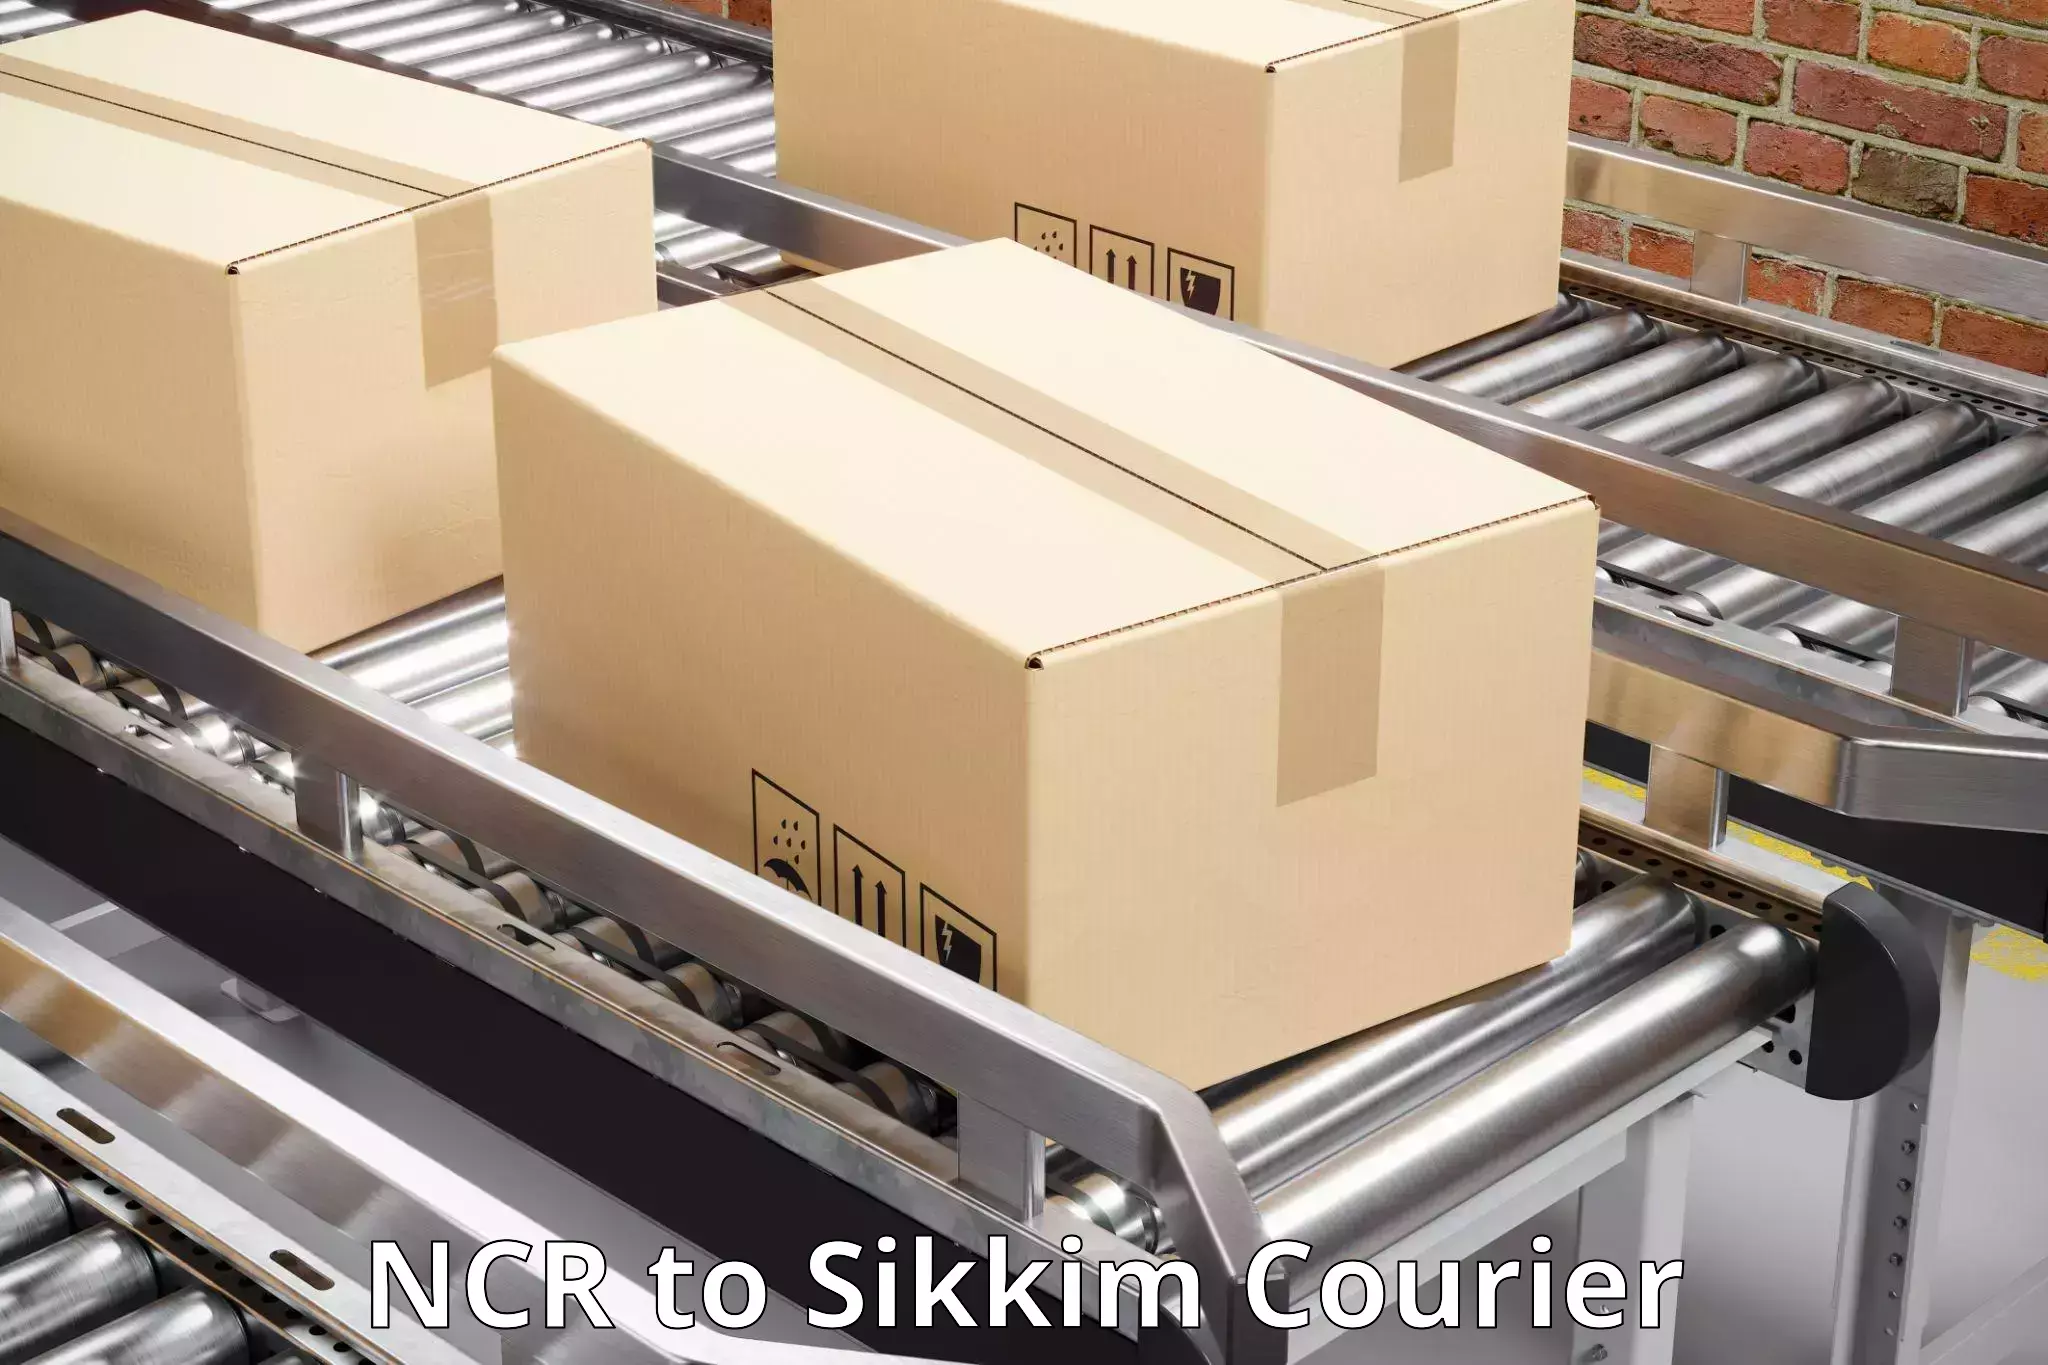 Weekend courier service NCR to Sikkim